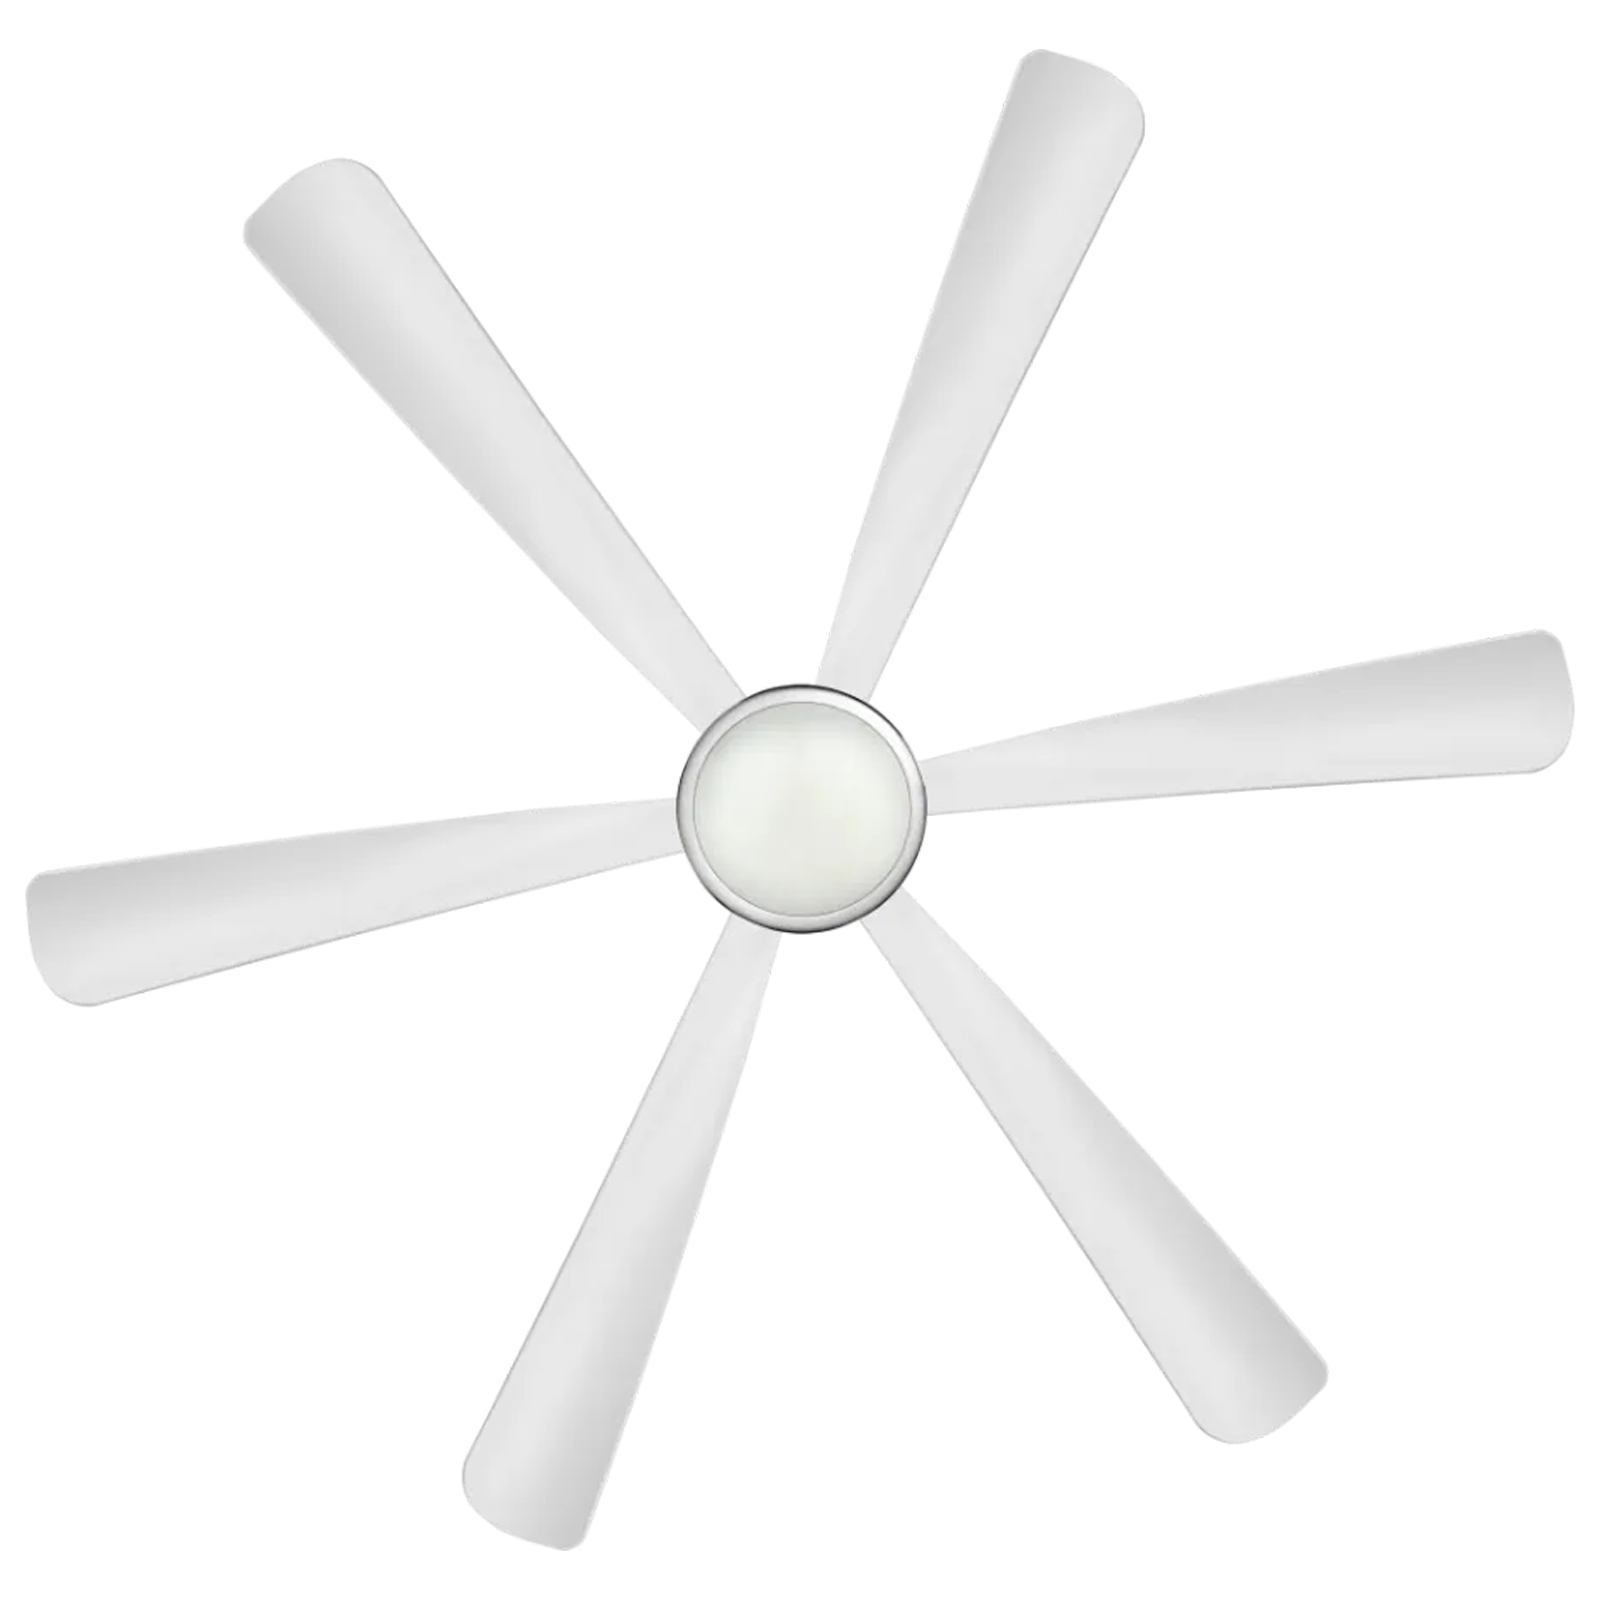 Kuhl Platin D6 150cm Sweep 6 Blade Smart Ceiling Fan (With BLDC Motor, 19034W, White)